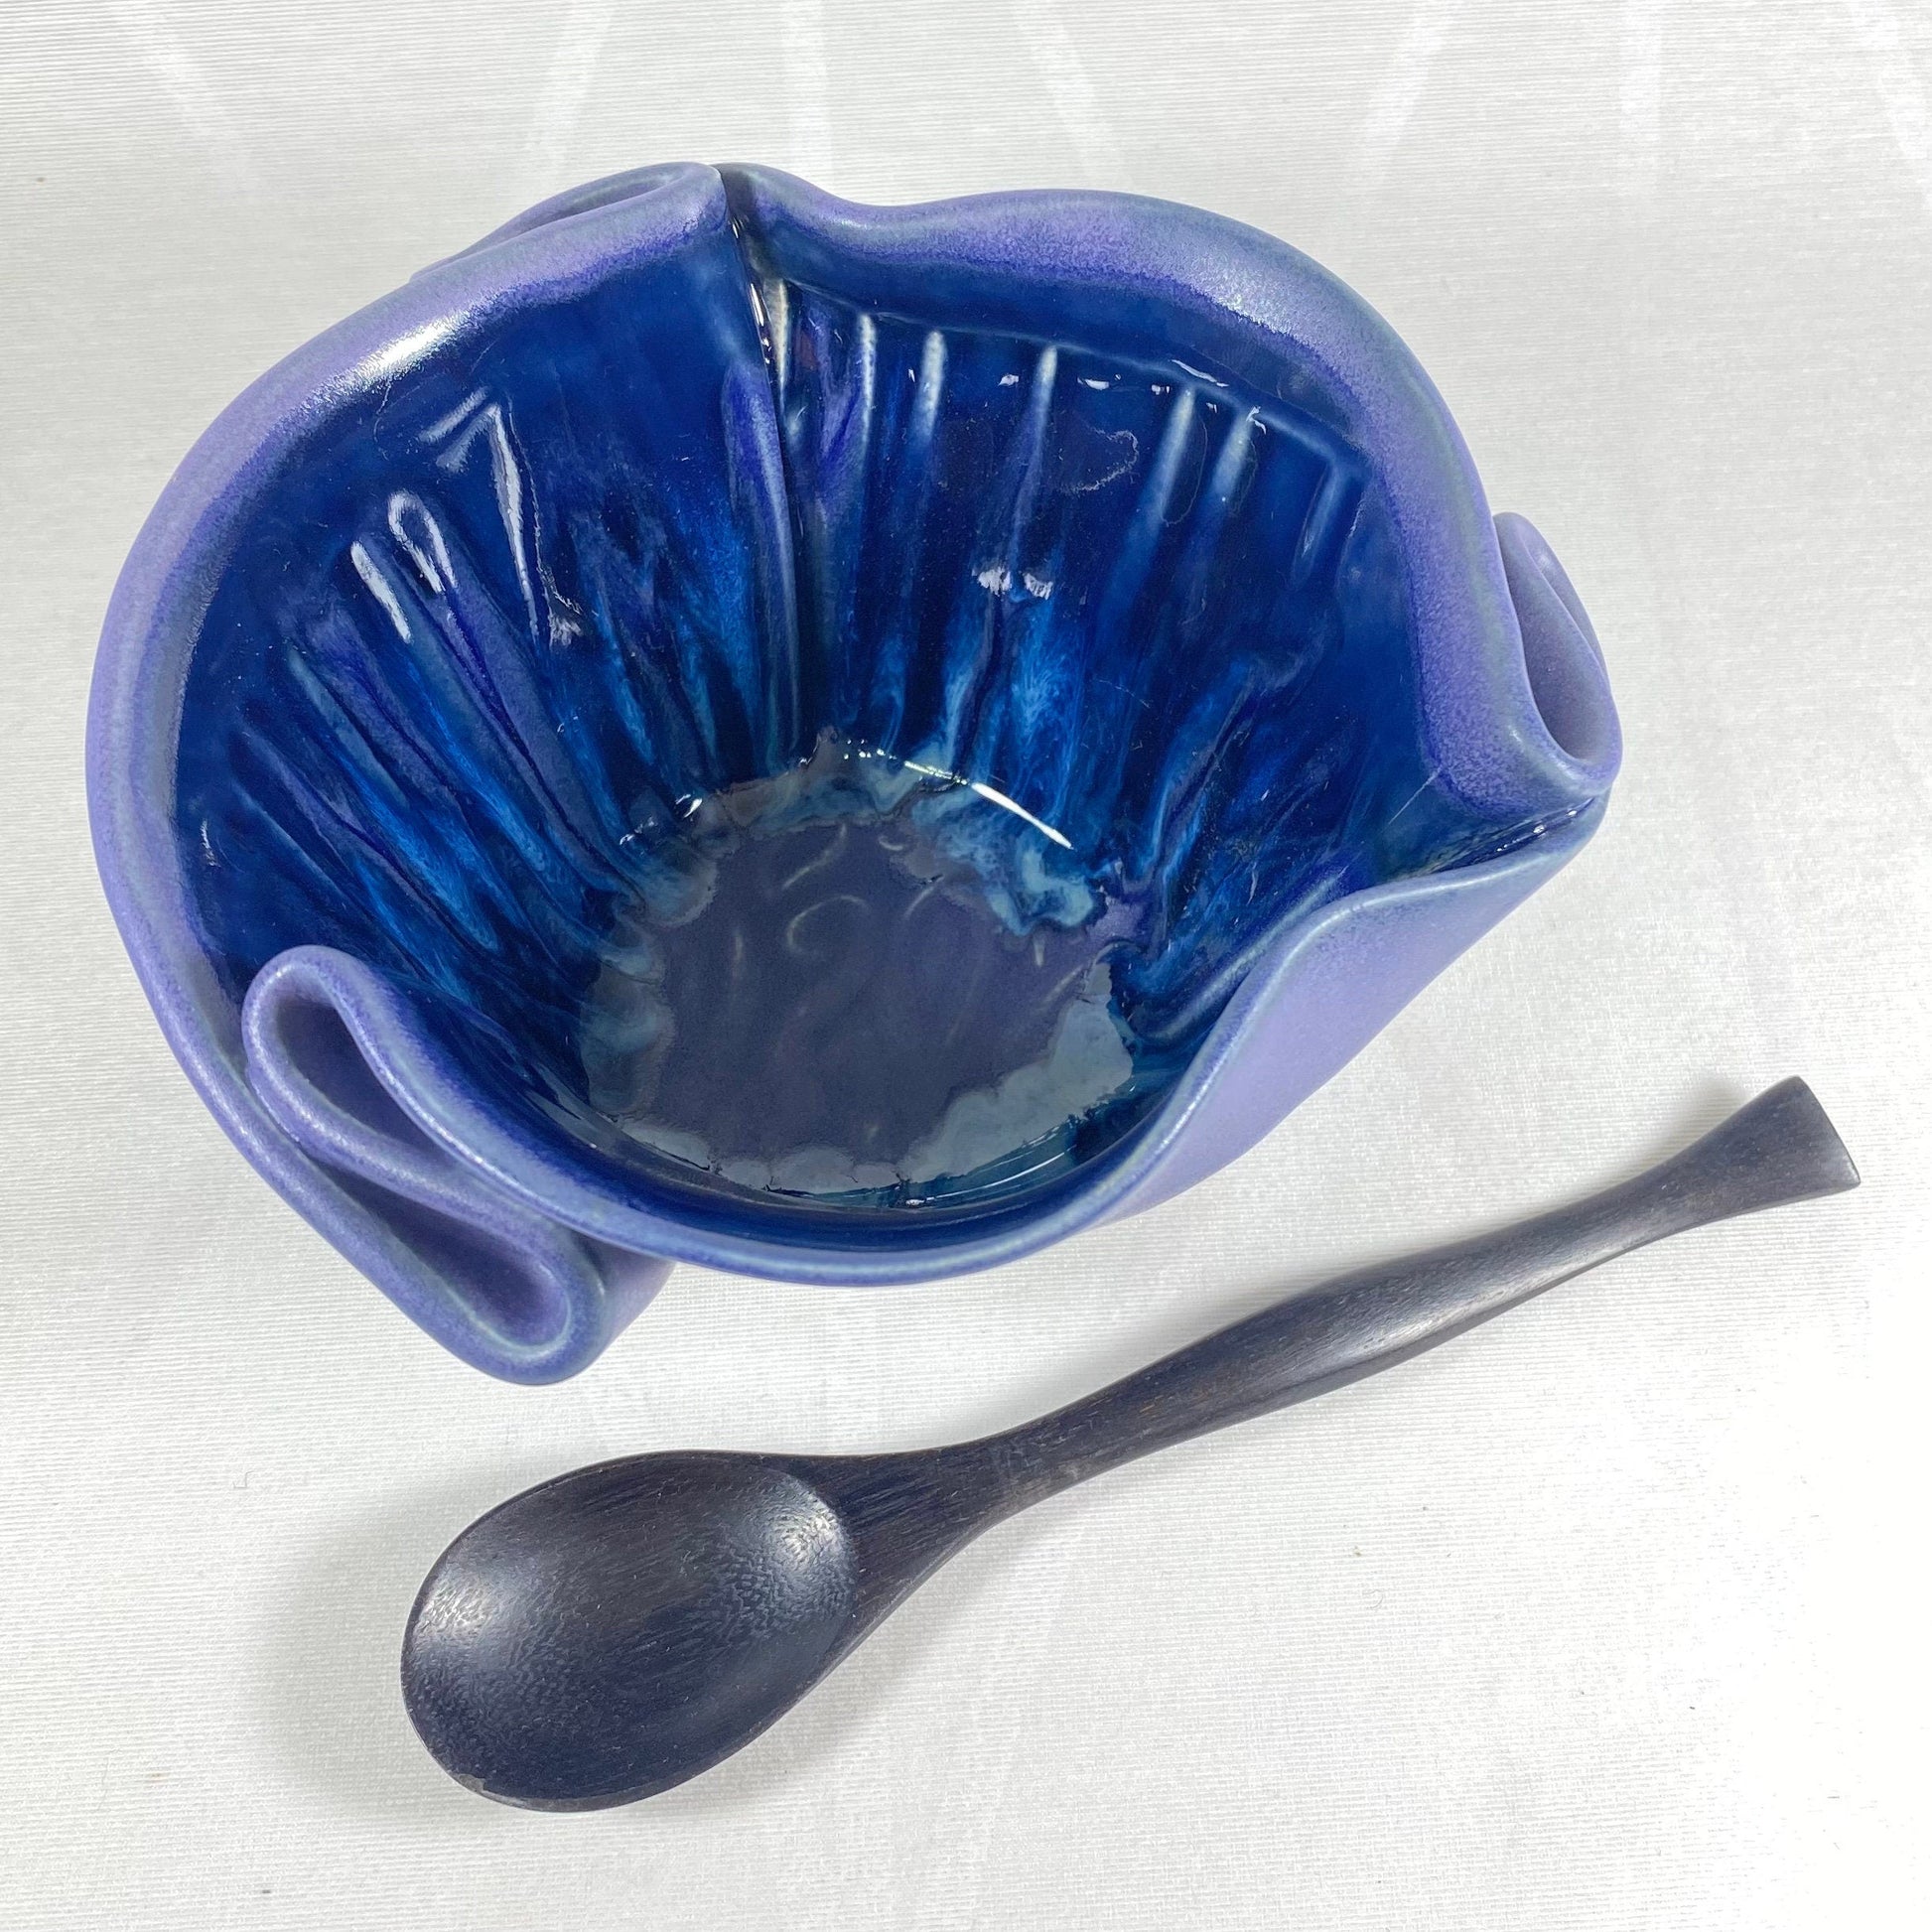 Handmade Purple and Blue Guacamole Bowl with Serving Spoon, Functional and Decorative Pottery